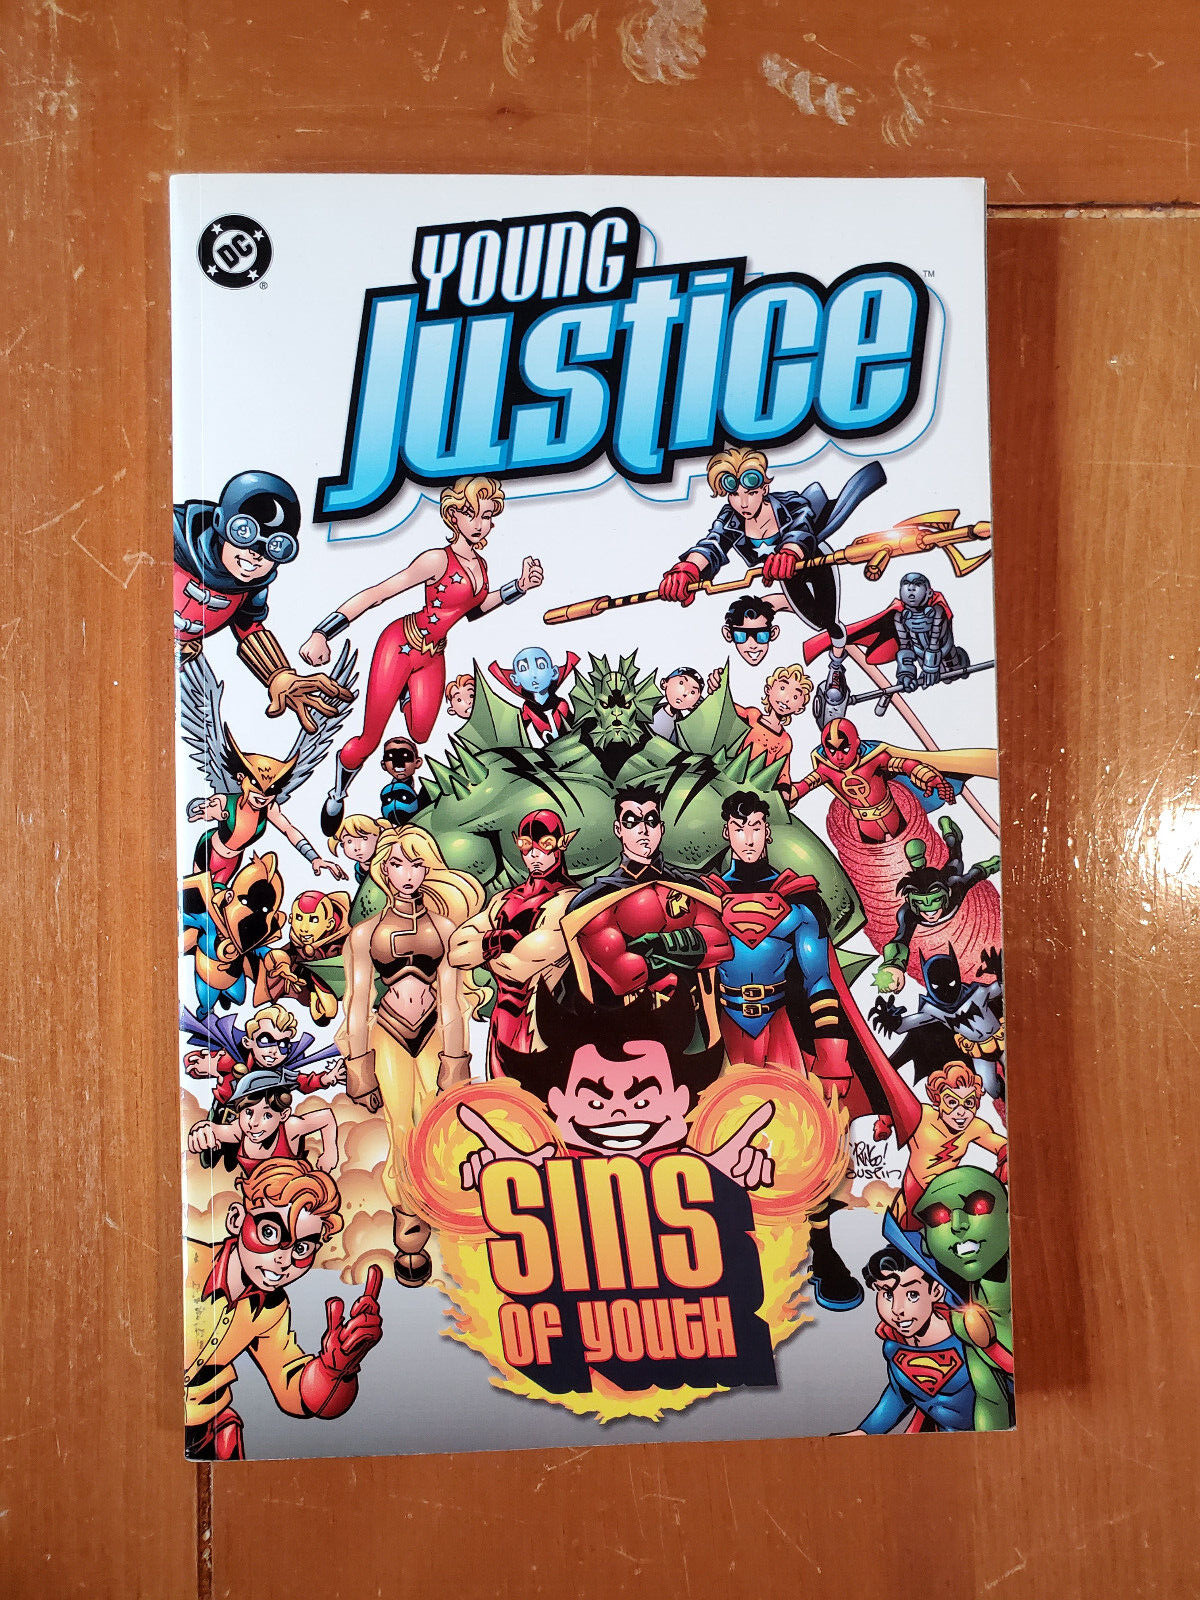 Young Justice: Sins of Youth (DC Comics December 2000)